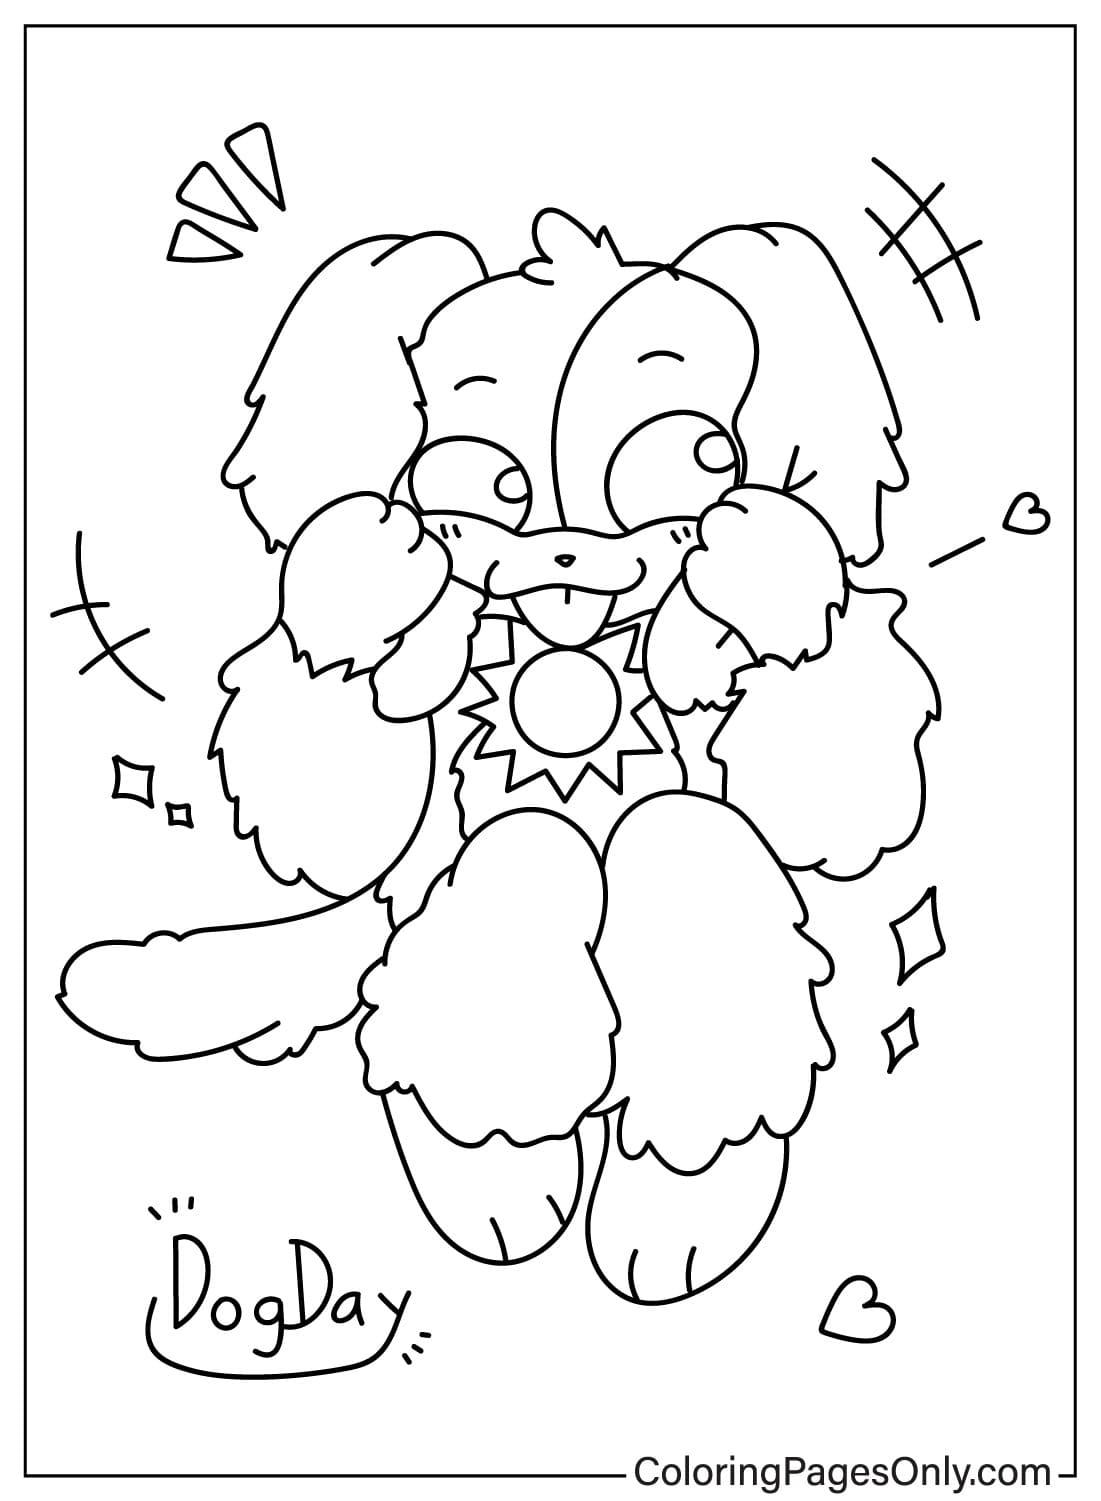 DogDay Coloring Page Printable from DogDay